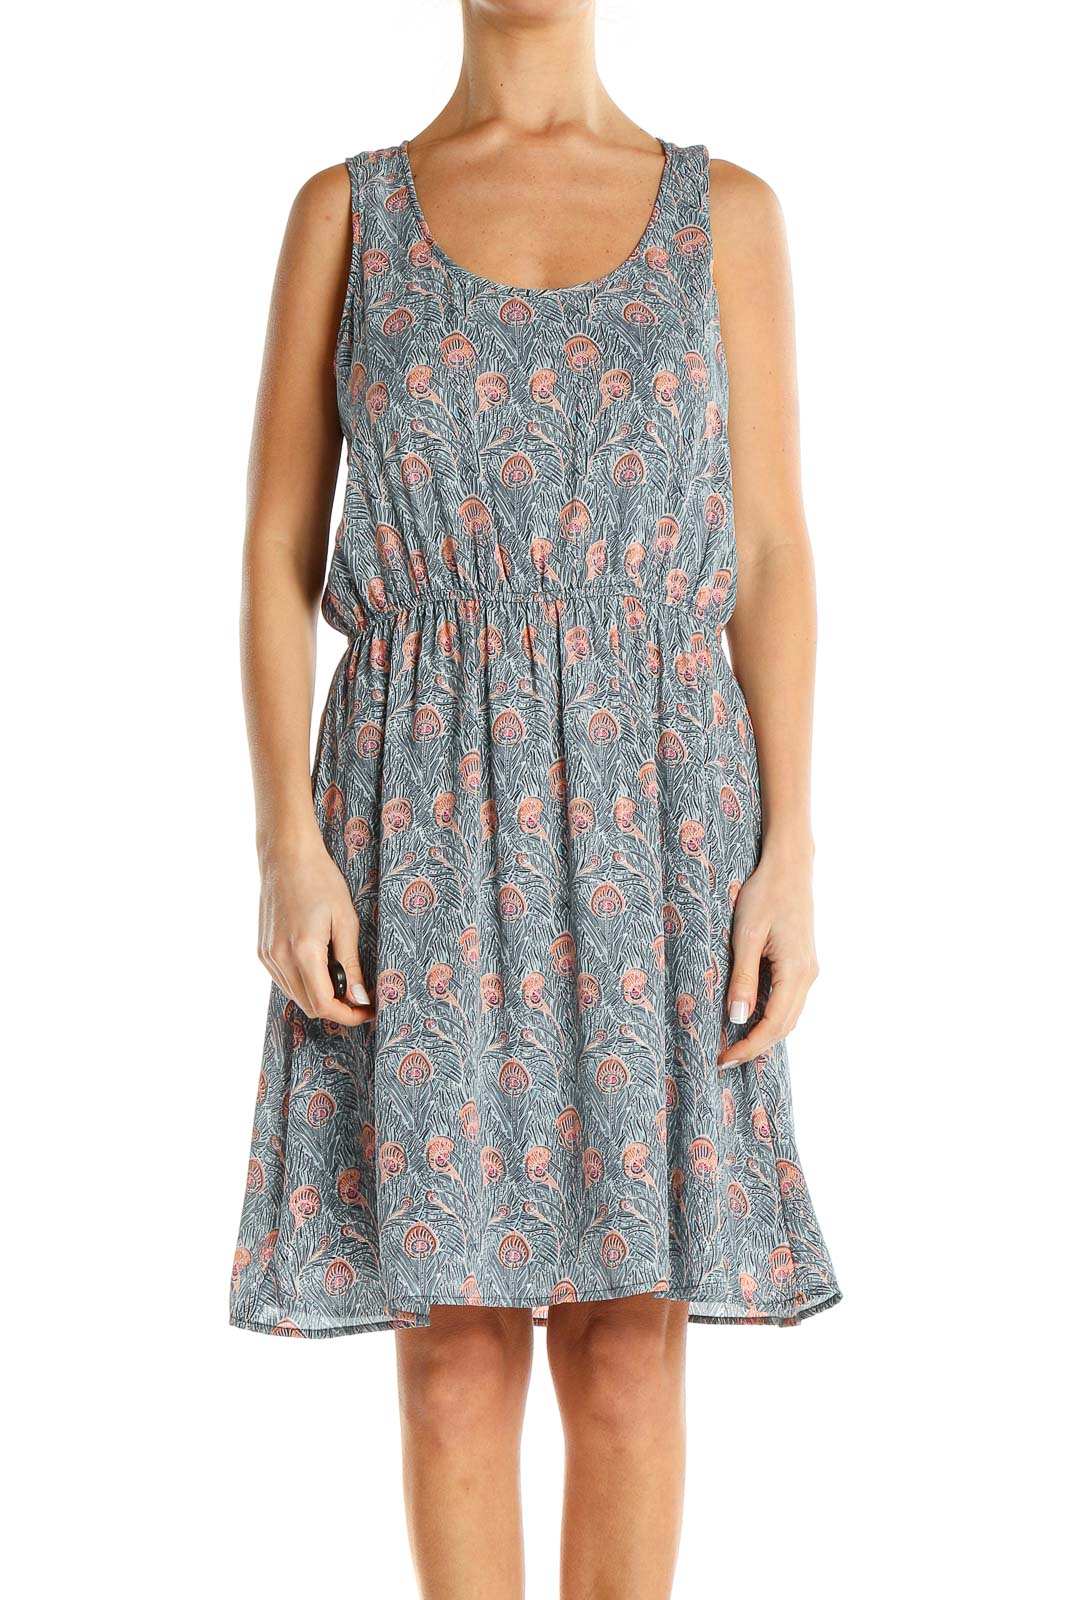 Blue Bohemian Peacock Print Fit & Flare Dress Front